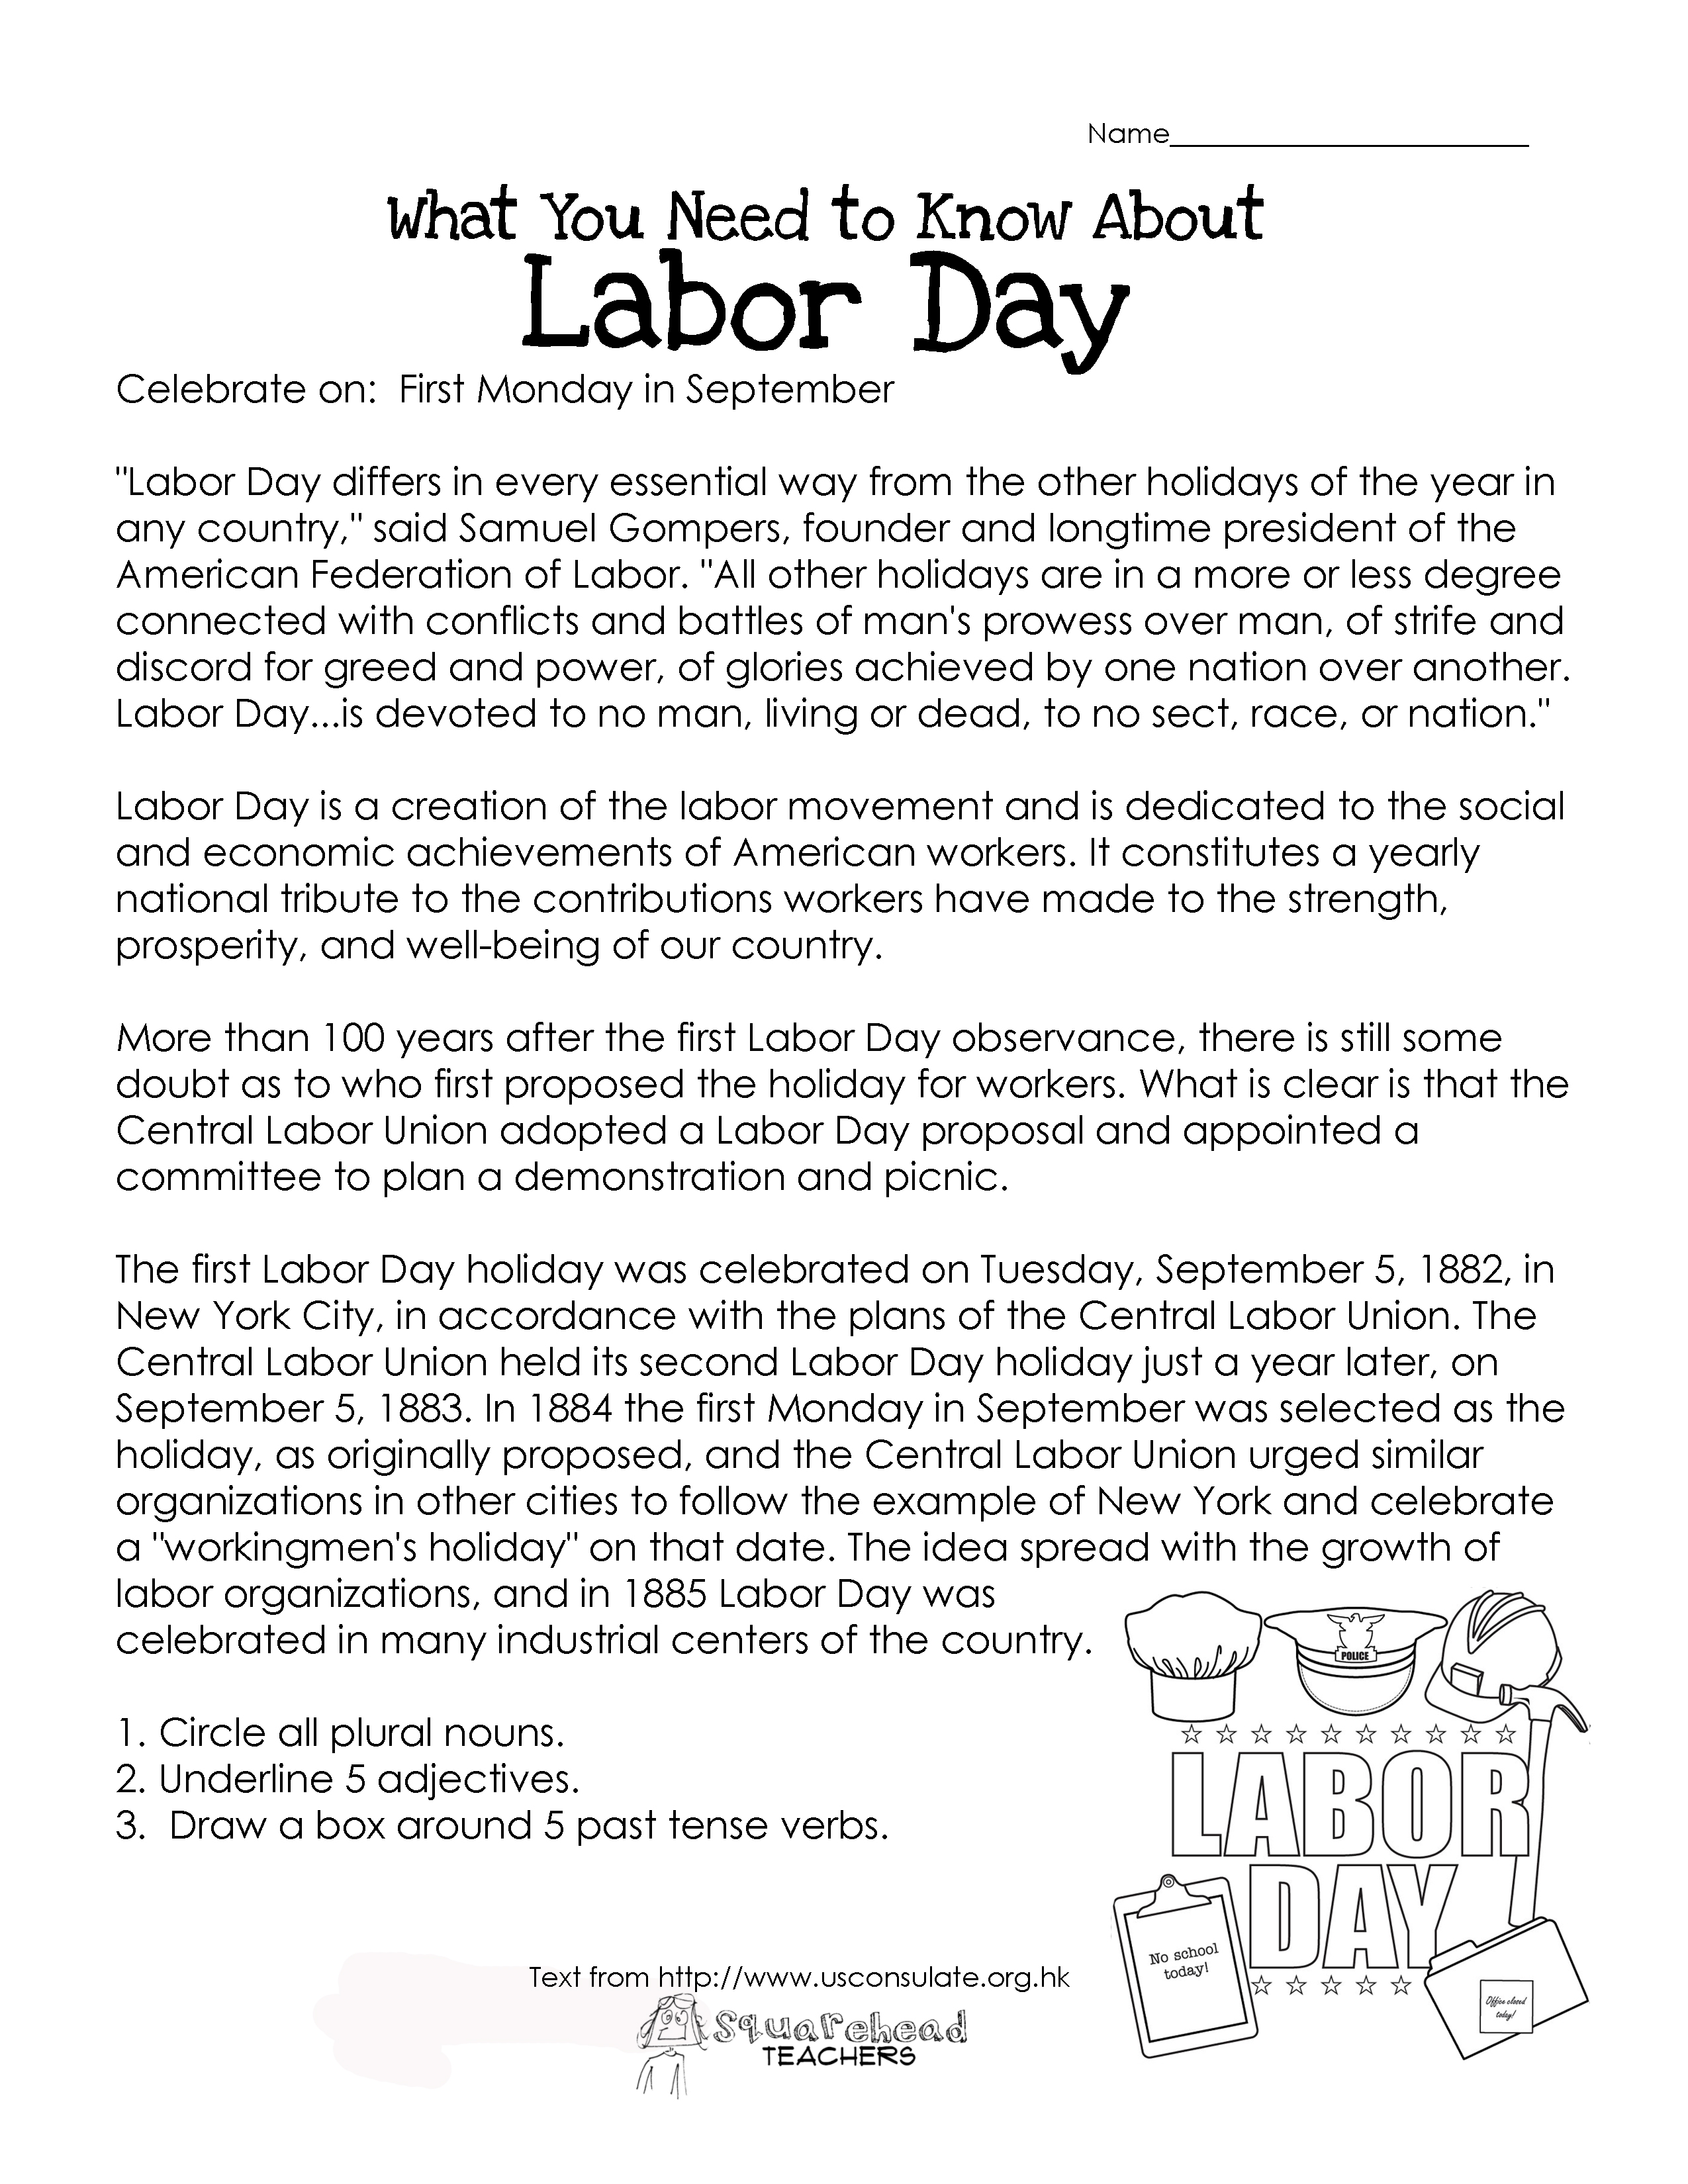 Labor Day- What You Need to Know (free worksheet!) | Squarehead Teachers